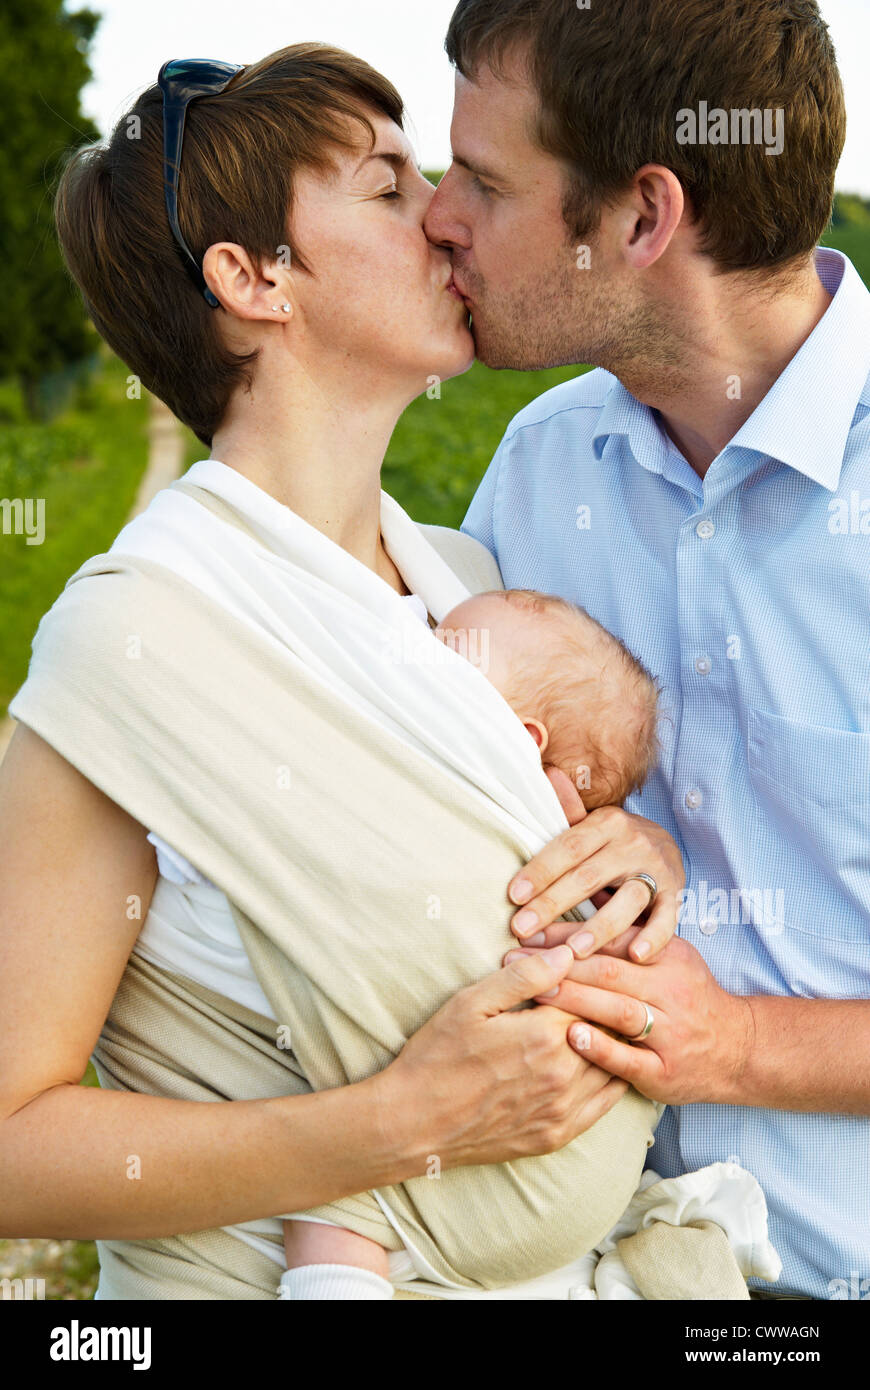 Couple kissing with infant outdoors Stock Photo